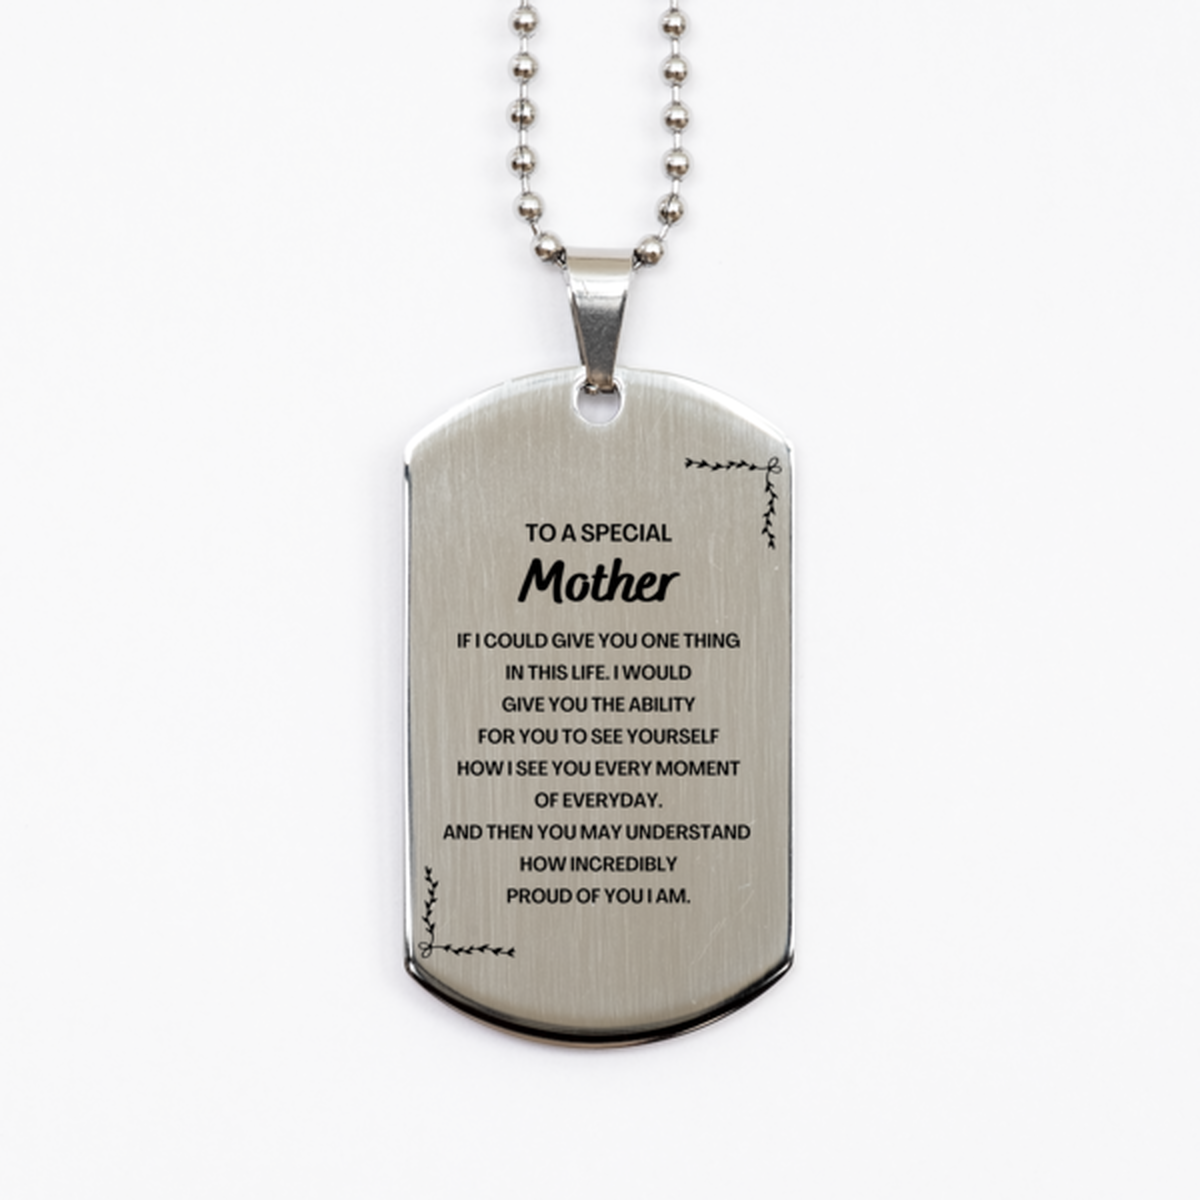 To My Mother Silver Dog Tag, Gifts For Mother Engraved, Inspirational Gifts for Christmas Birthday, Epic Gifts for Mother To A Special Mother how incredibly proud of you I am